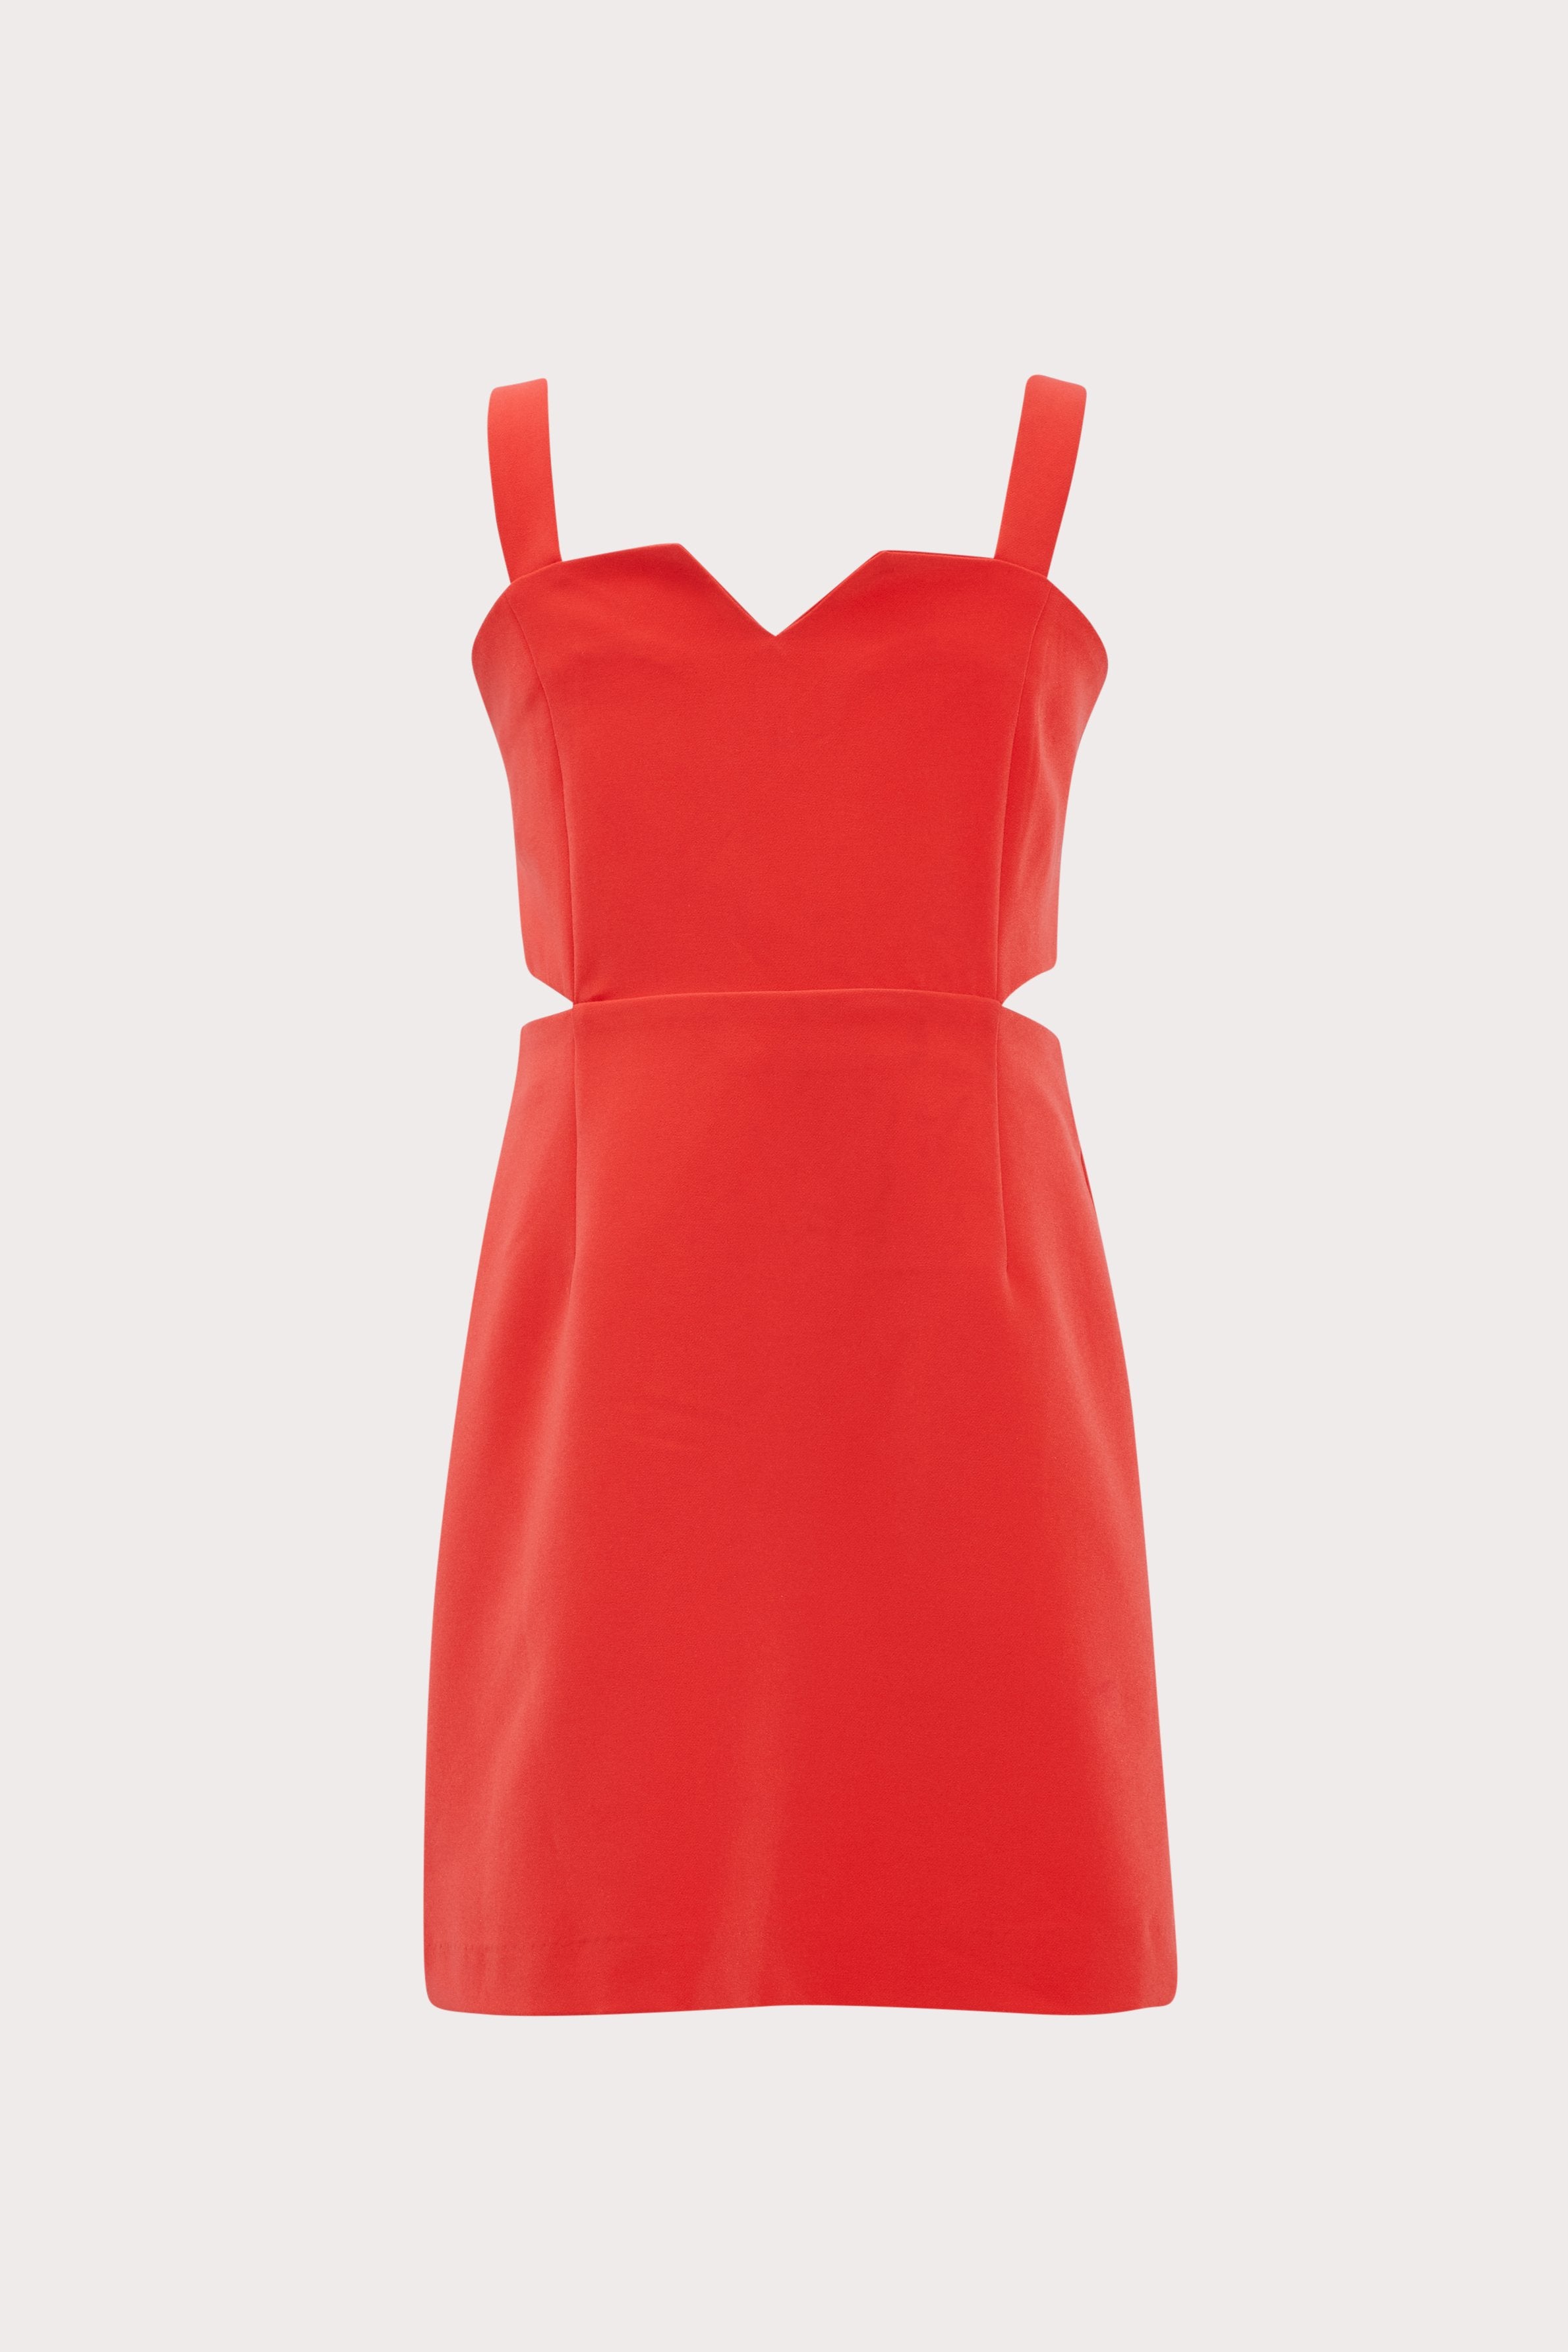 Milly Minis Cady Hazel Cut Out Dress In Red